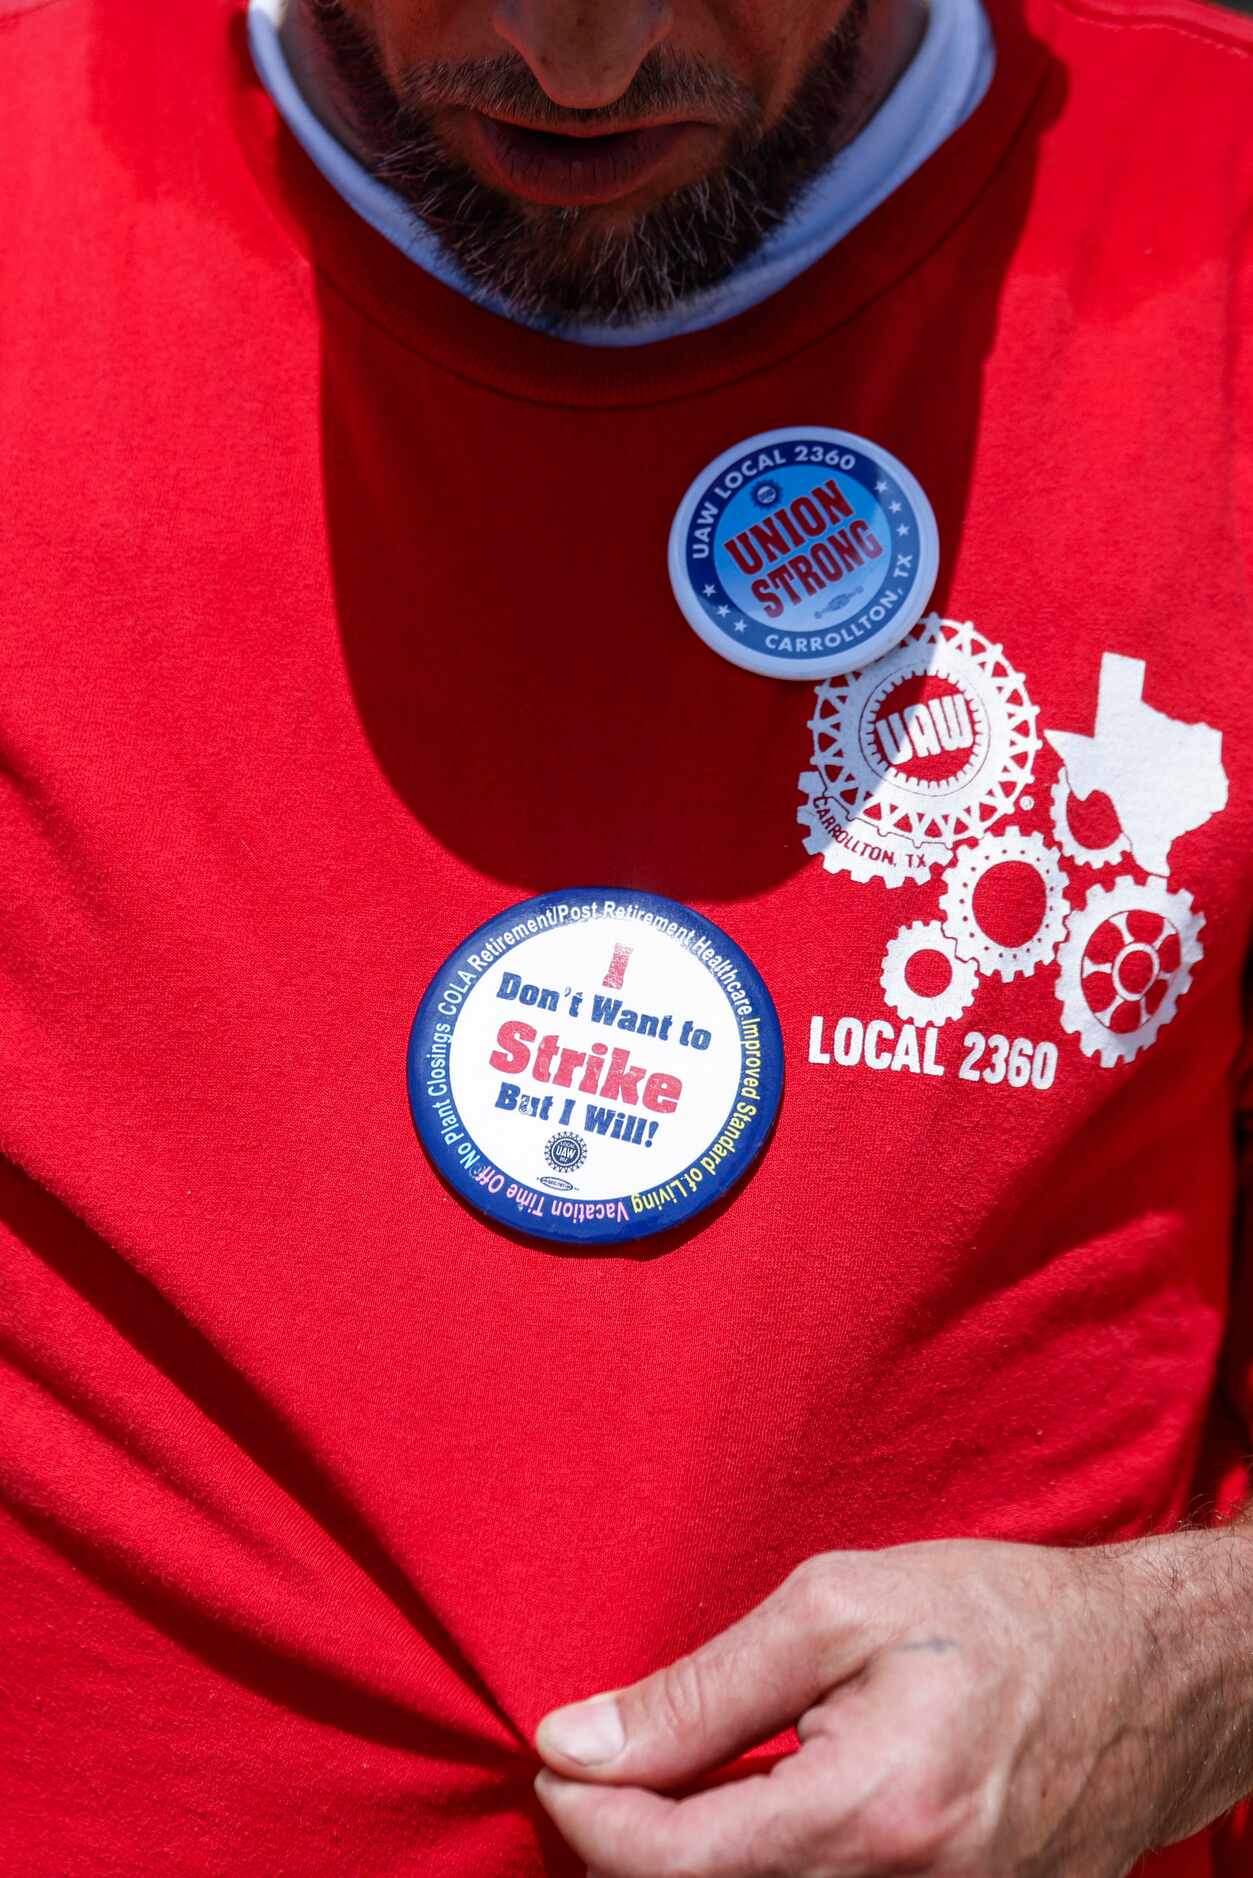 Co-chair off community service committee of UAW local 2360, Phillip Laws, shows his badges...